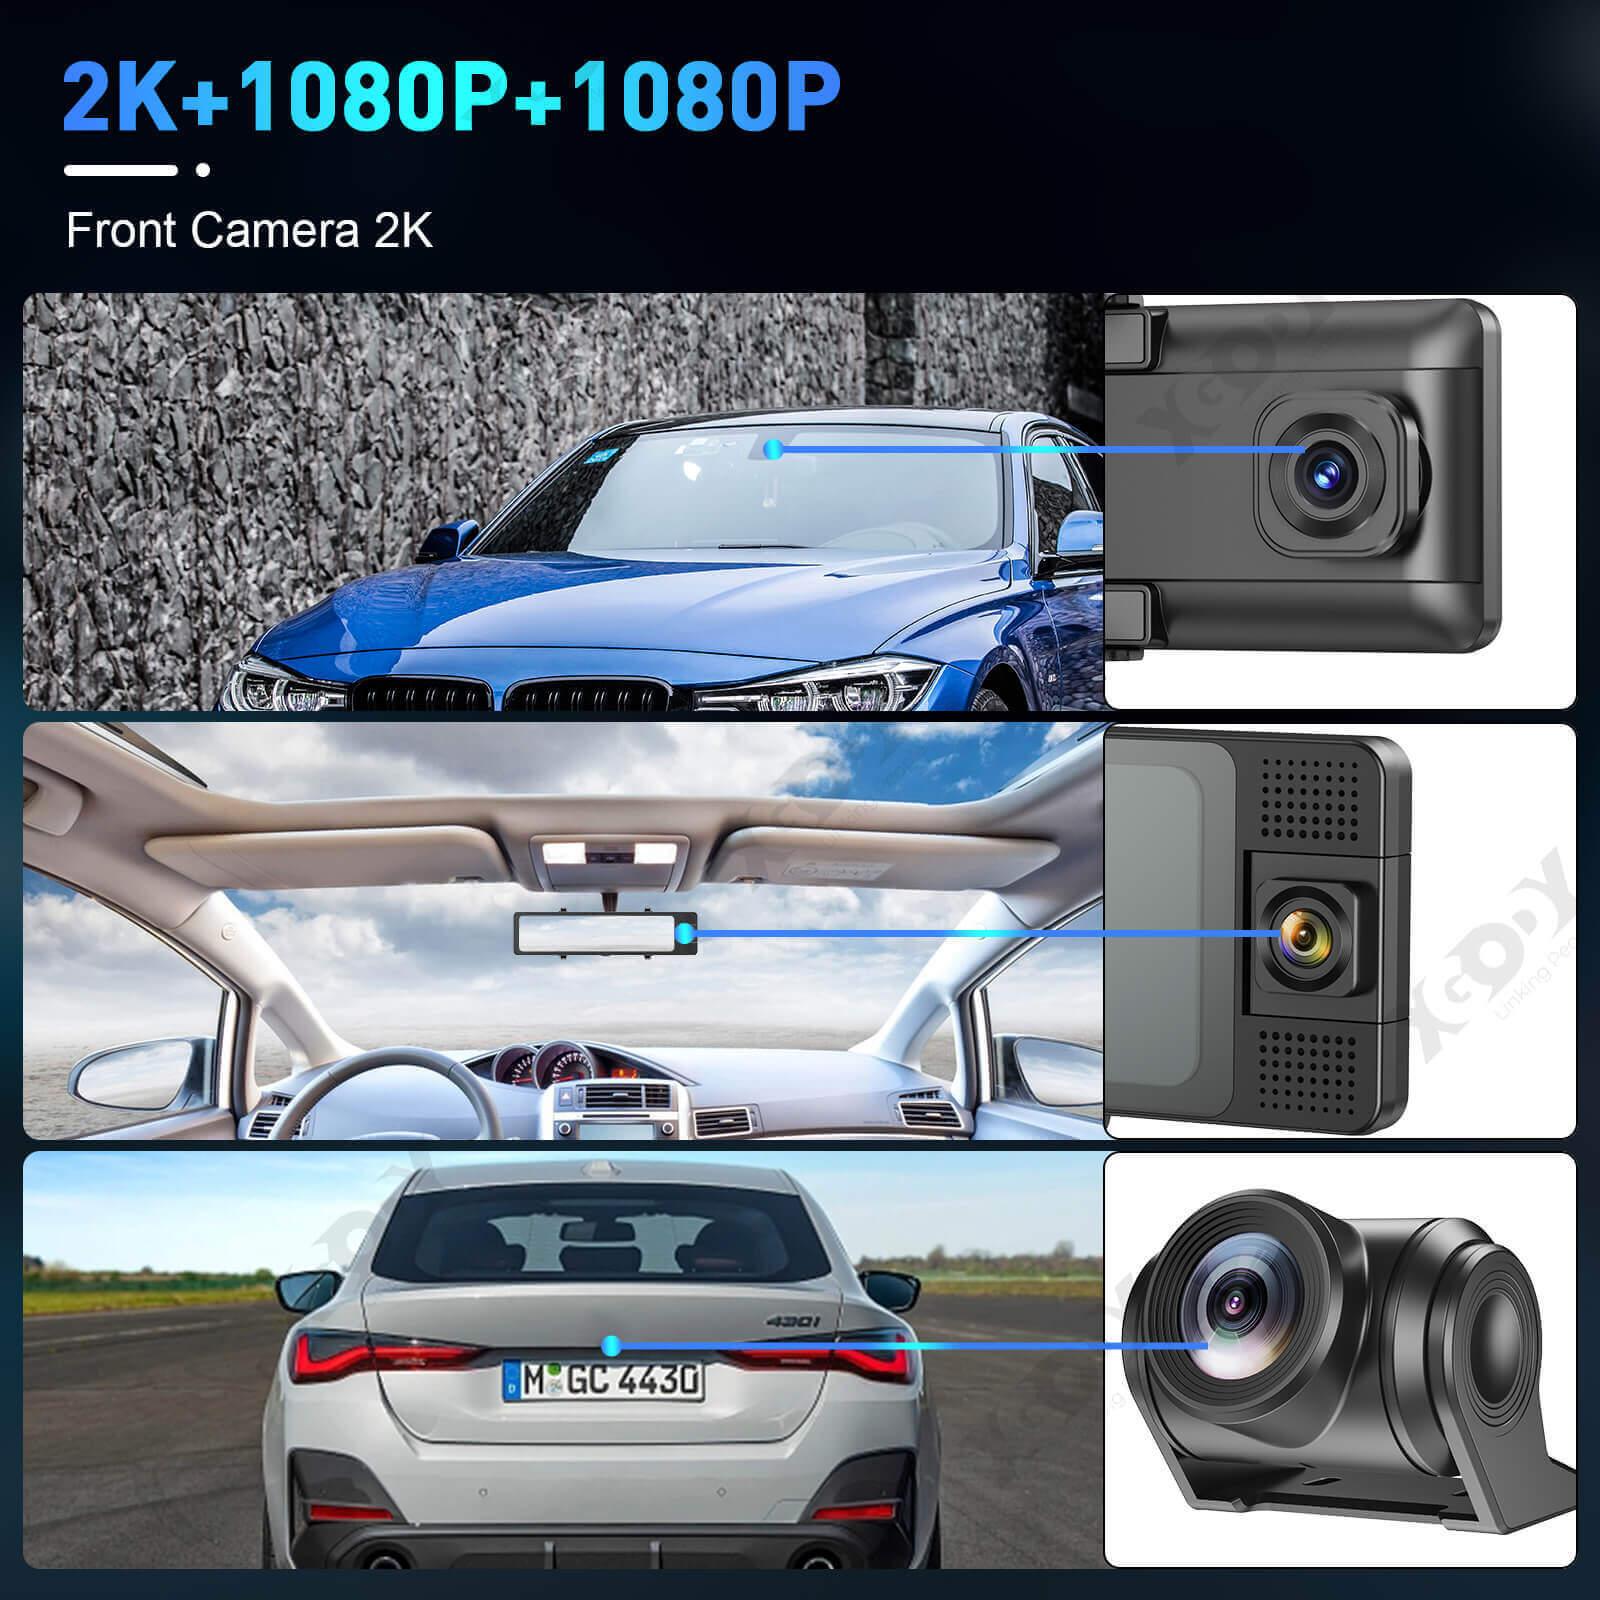 Cost-effective and Most worthwhile XGODY J406 Triple Channels Dash Cam - 12-Inch Touch Screen, 4K Ultra HD - XGODY 